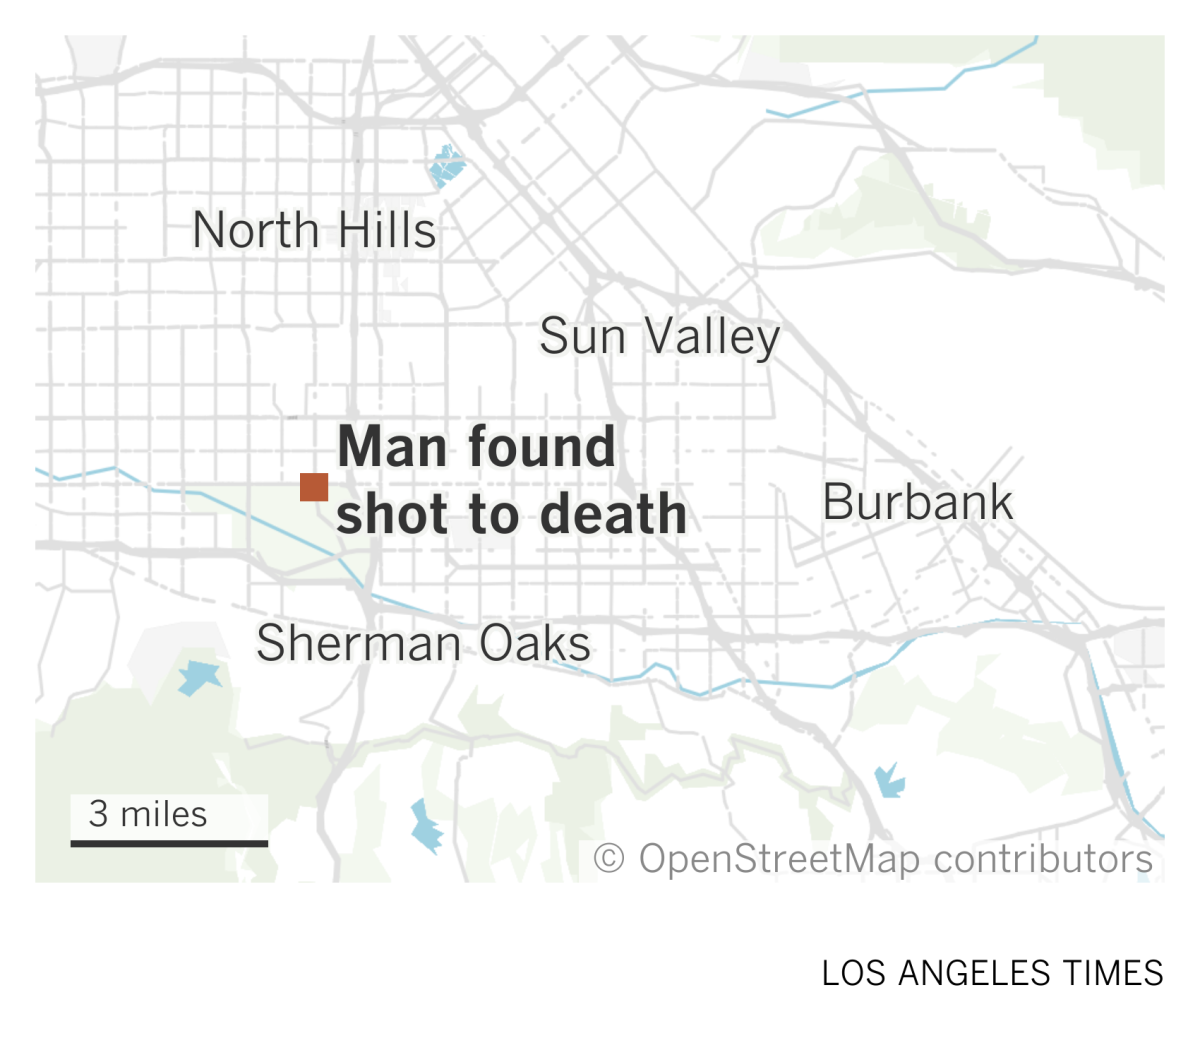 A map of the San Fernando Valley shows where a man was found shot to death in the Sepulveda Basin Recreation Area